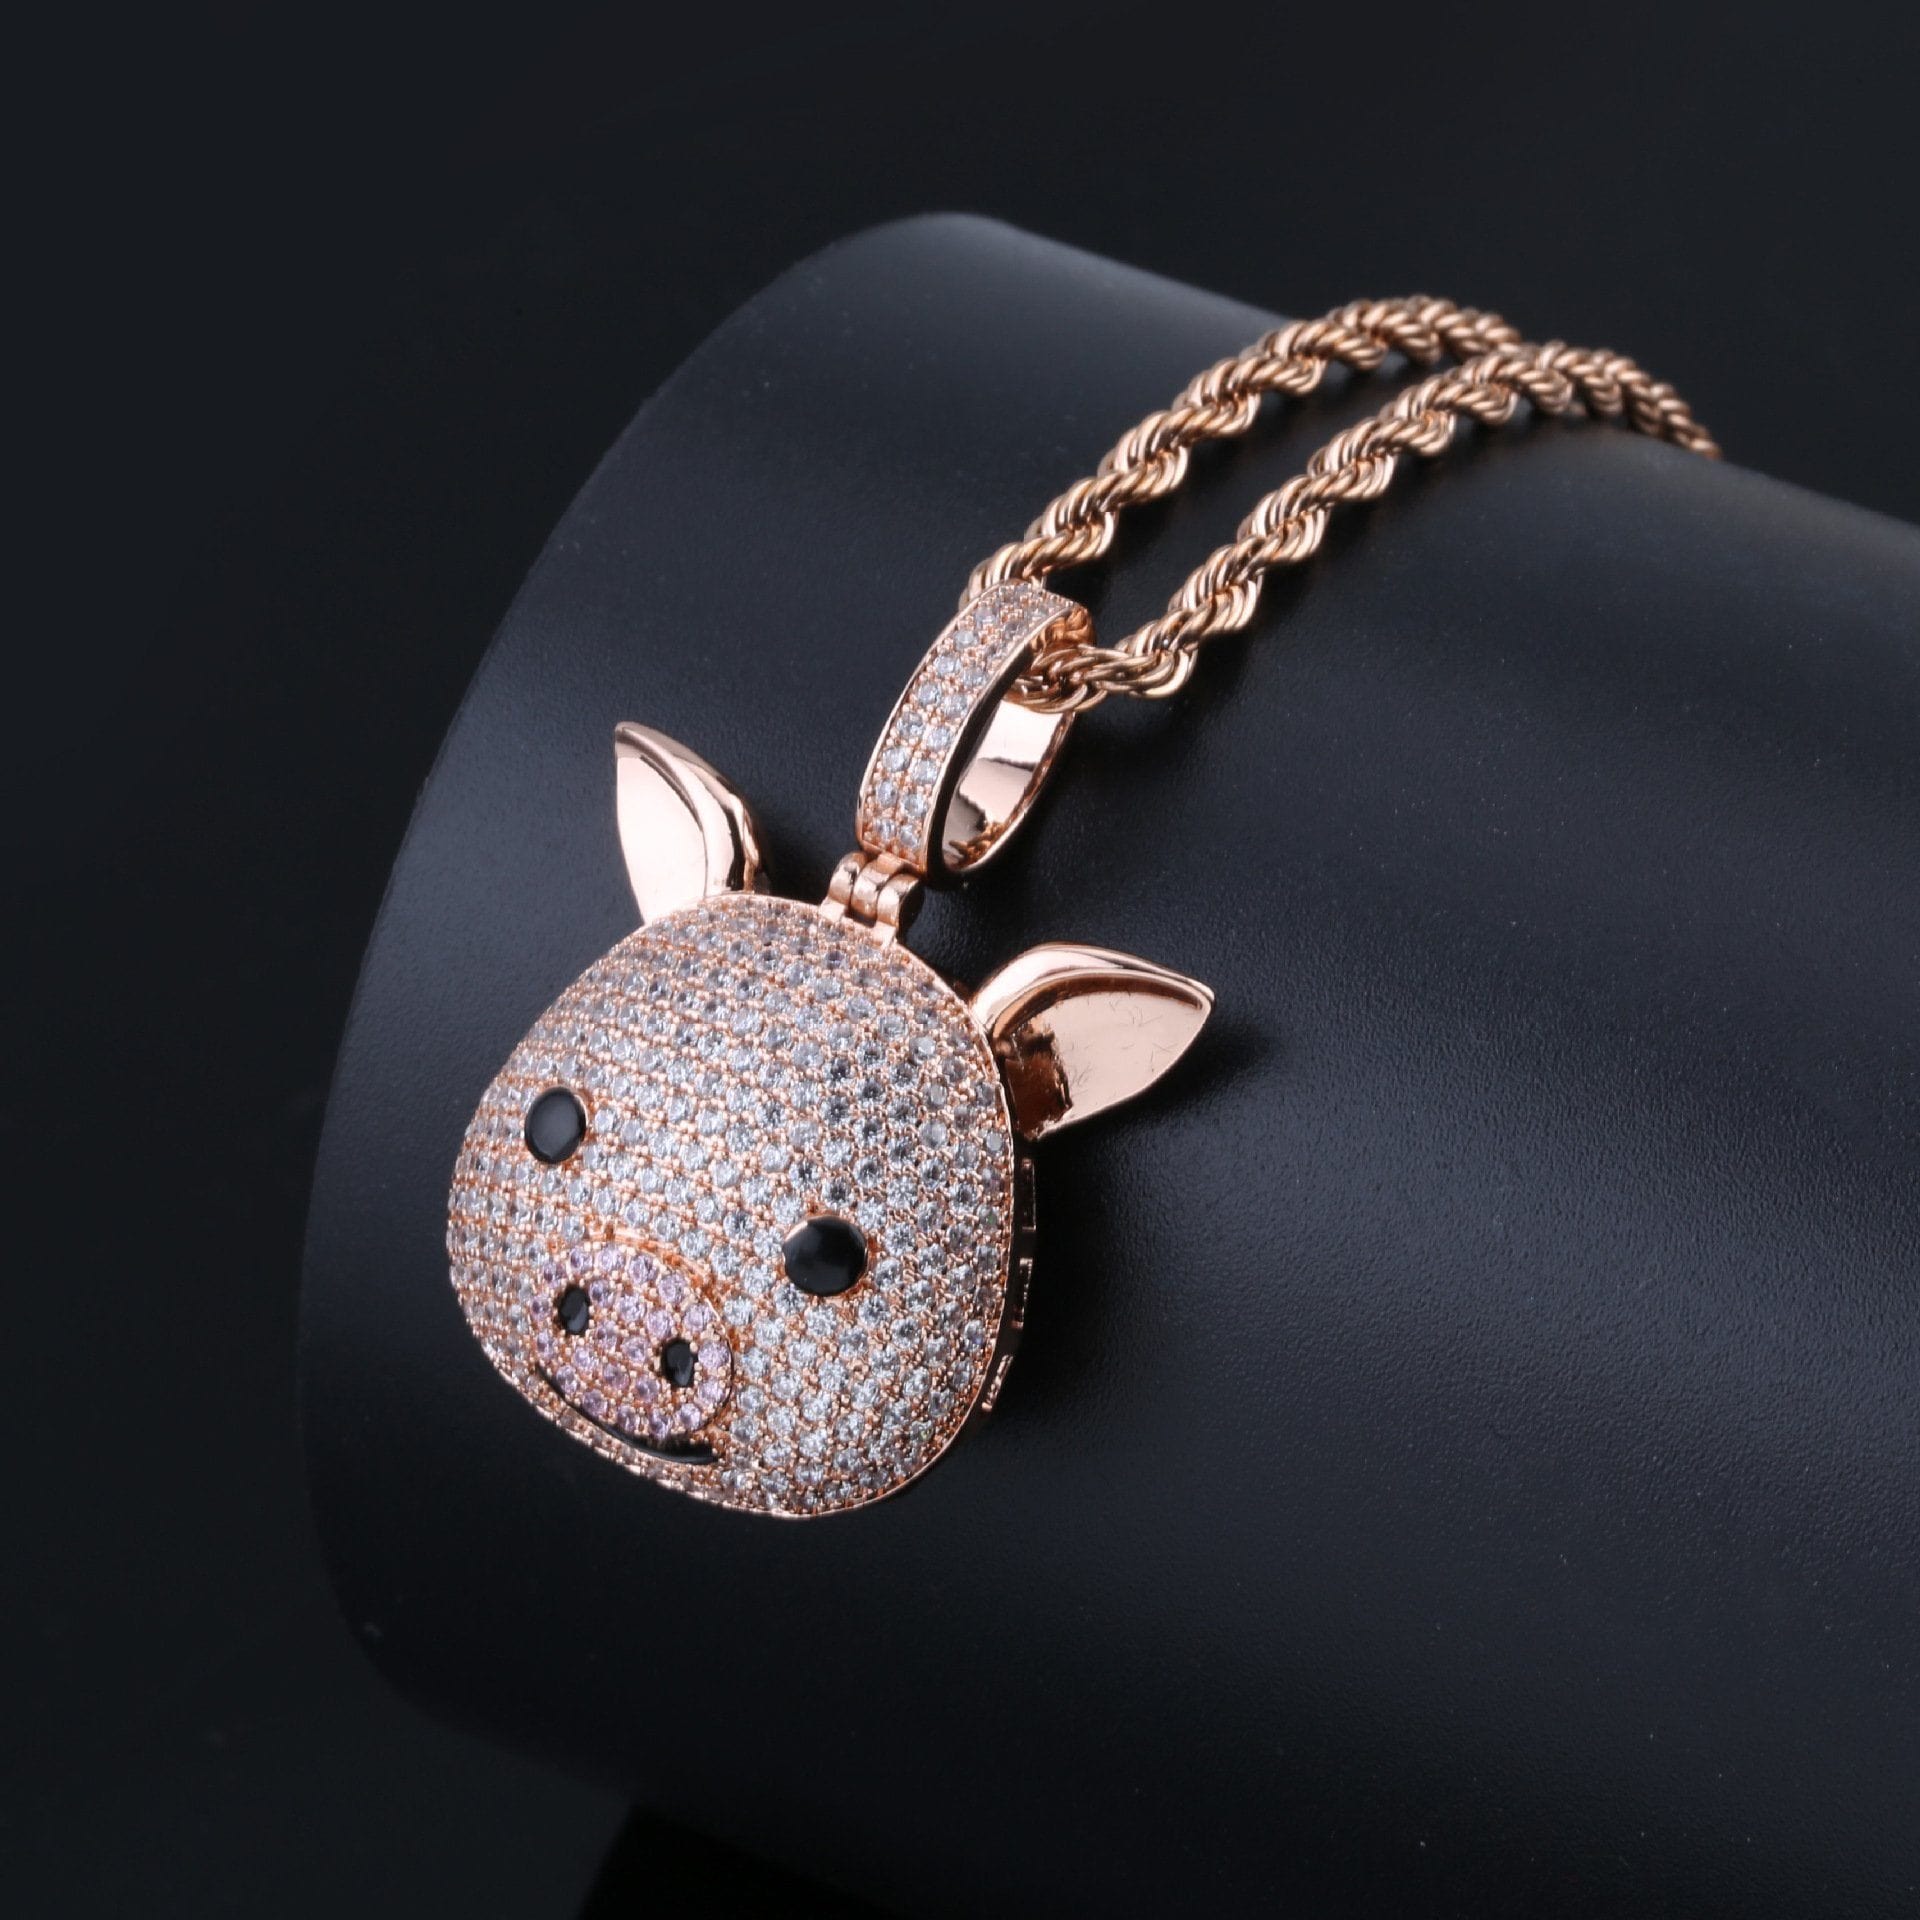 Pig Pendant Rose Gold Plated Solid Sterling Silver--"Lily" GORGEOUS! BLING! - The Pink Pigs, A Compassionate Boutique